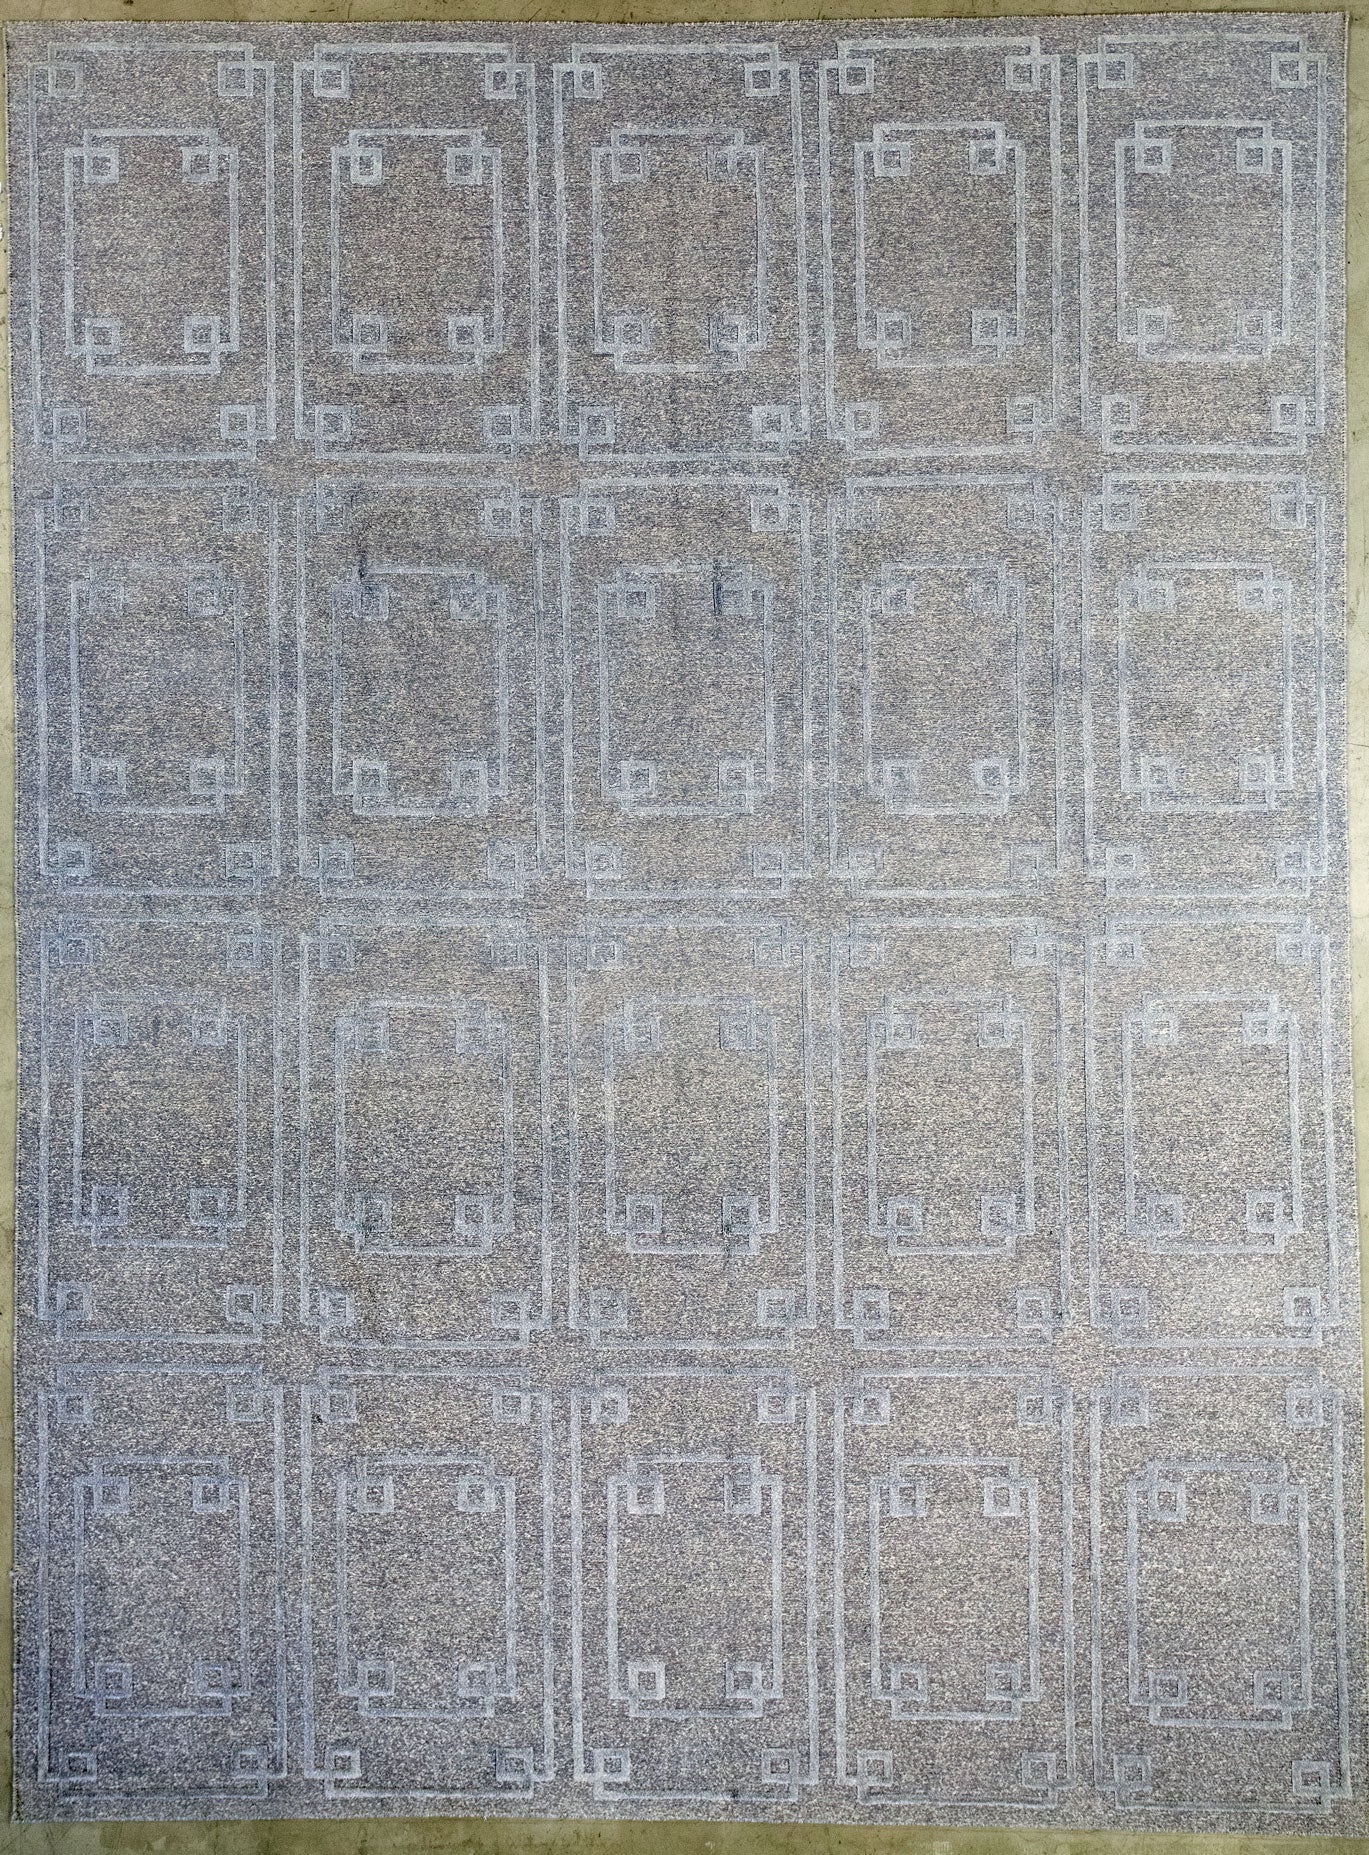 Minimalistic carpet has gray background, and its pattern in light gray for contrasting purposes. This monochromatic rug has a rectangle pattern, which is composed by five columns of vertical ones and fours rows total.